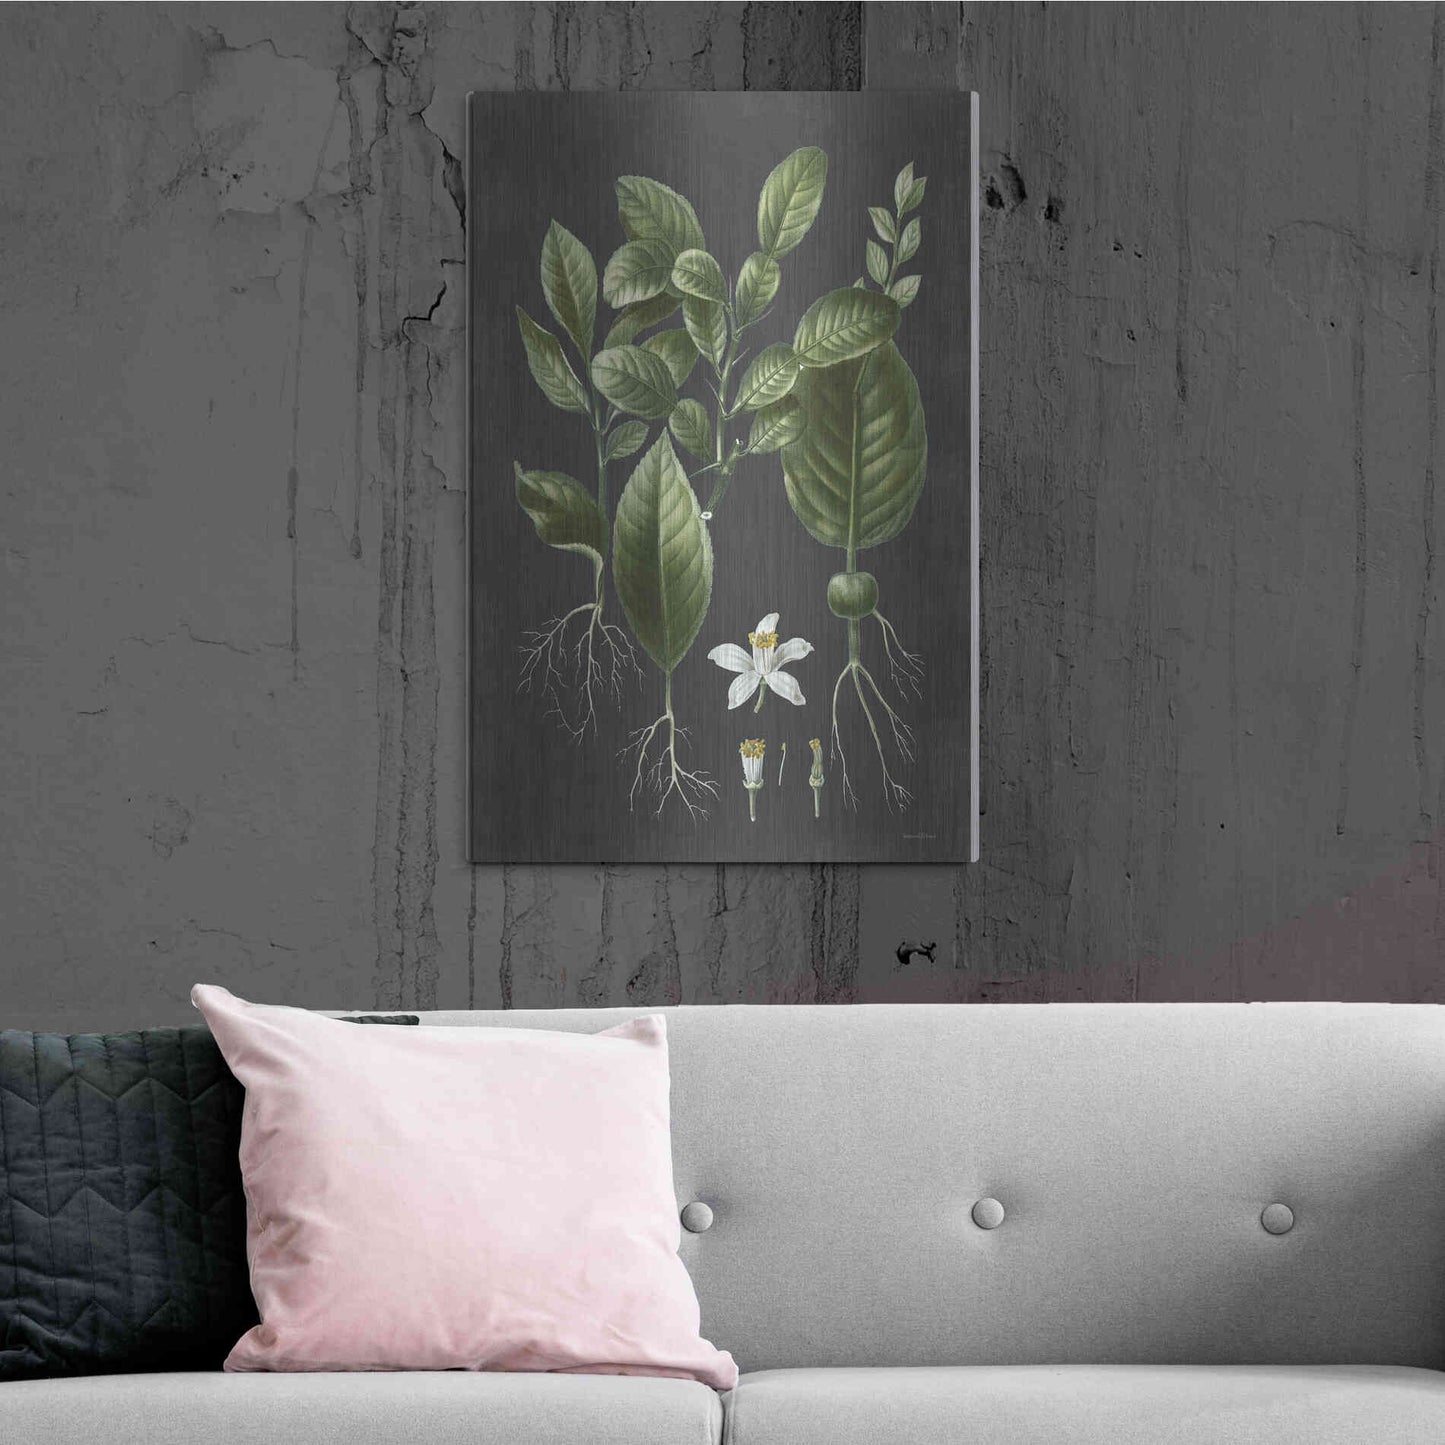 Luxe Metal Art 'Citrus Botanical' by Lettered & Lined, Metal Wall Art,24x36